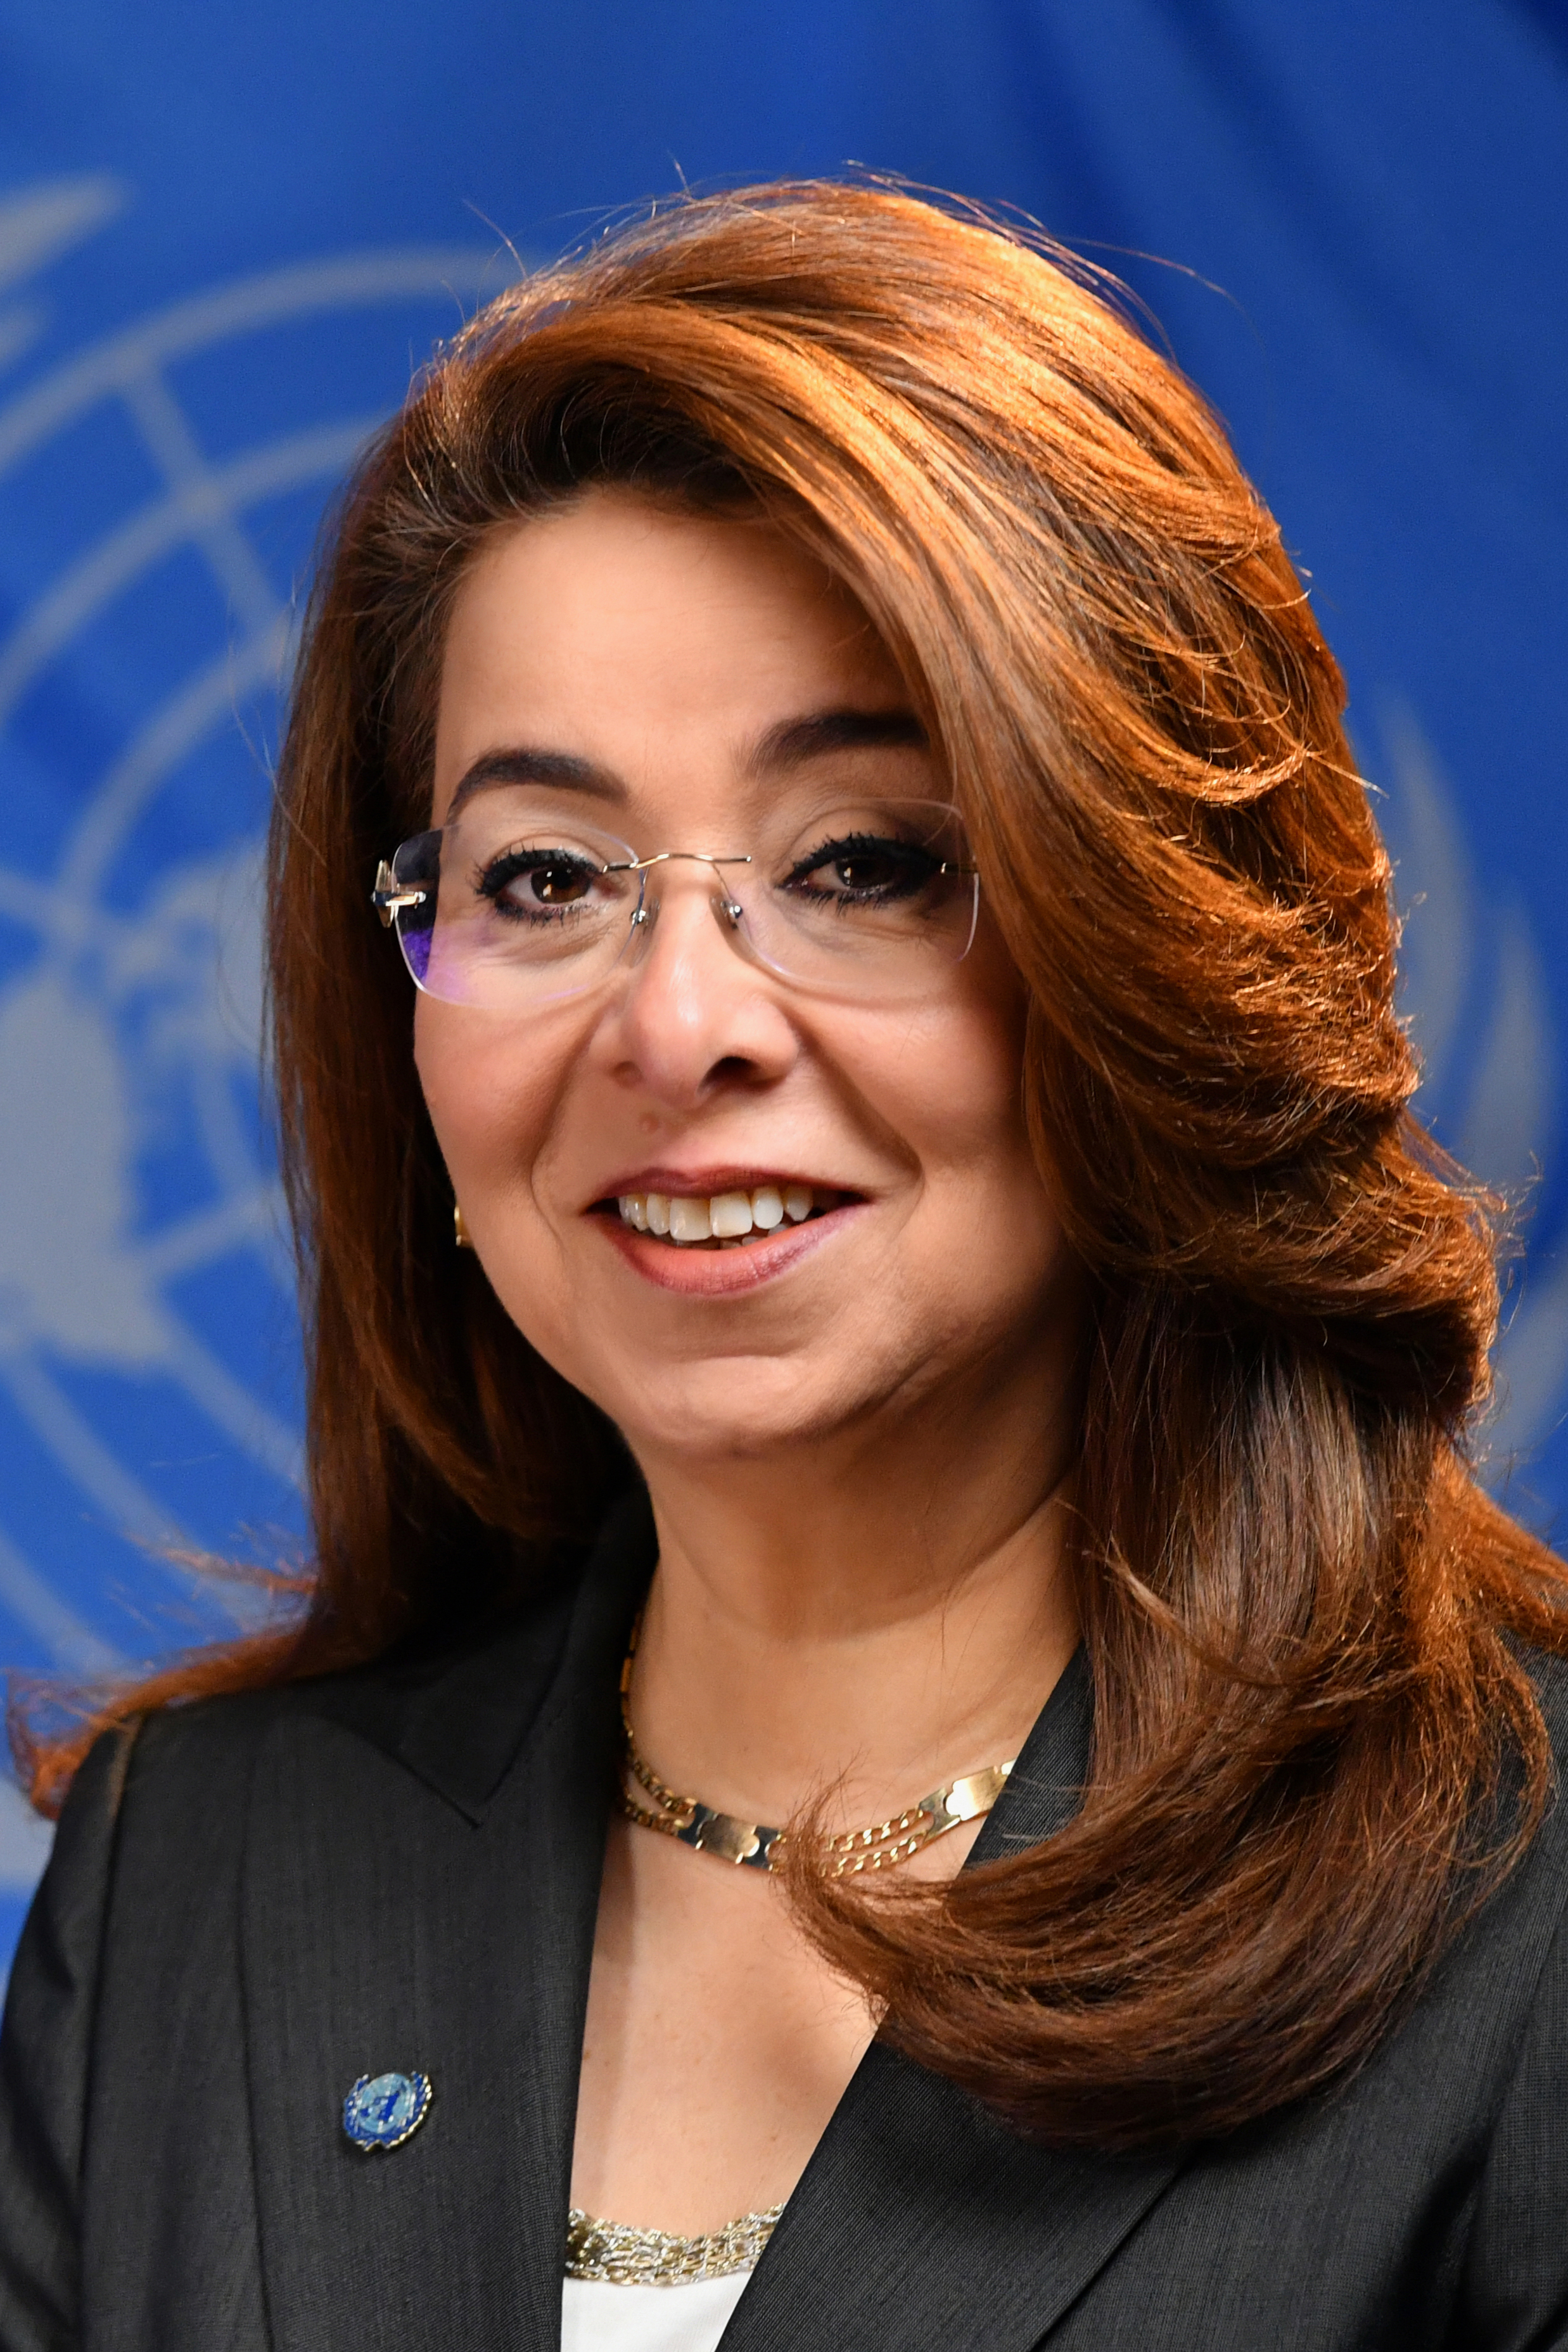 <p>Ms. Ghada Waly, Director-General of the United Nations Office at Vienna</p>